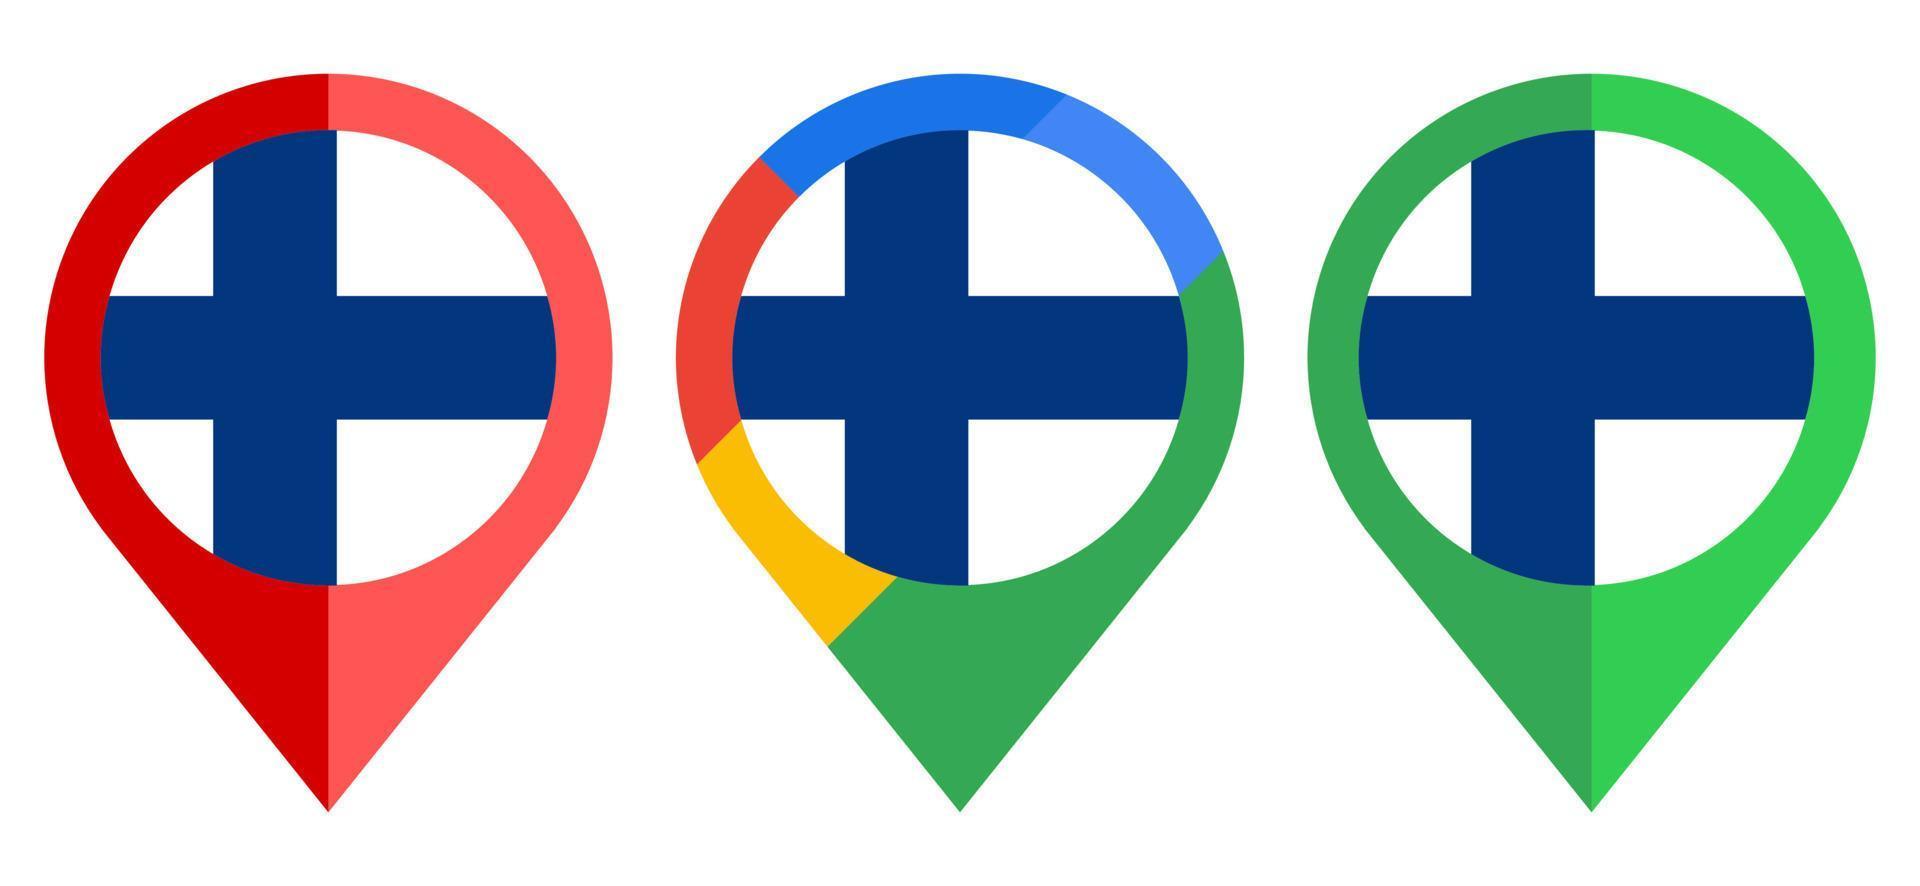 flat map marker icon with finland flag isolated on white background vector